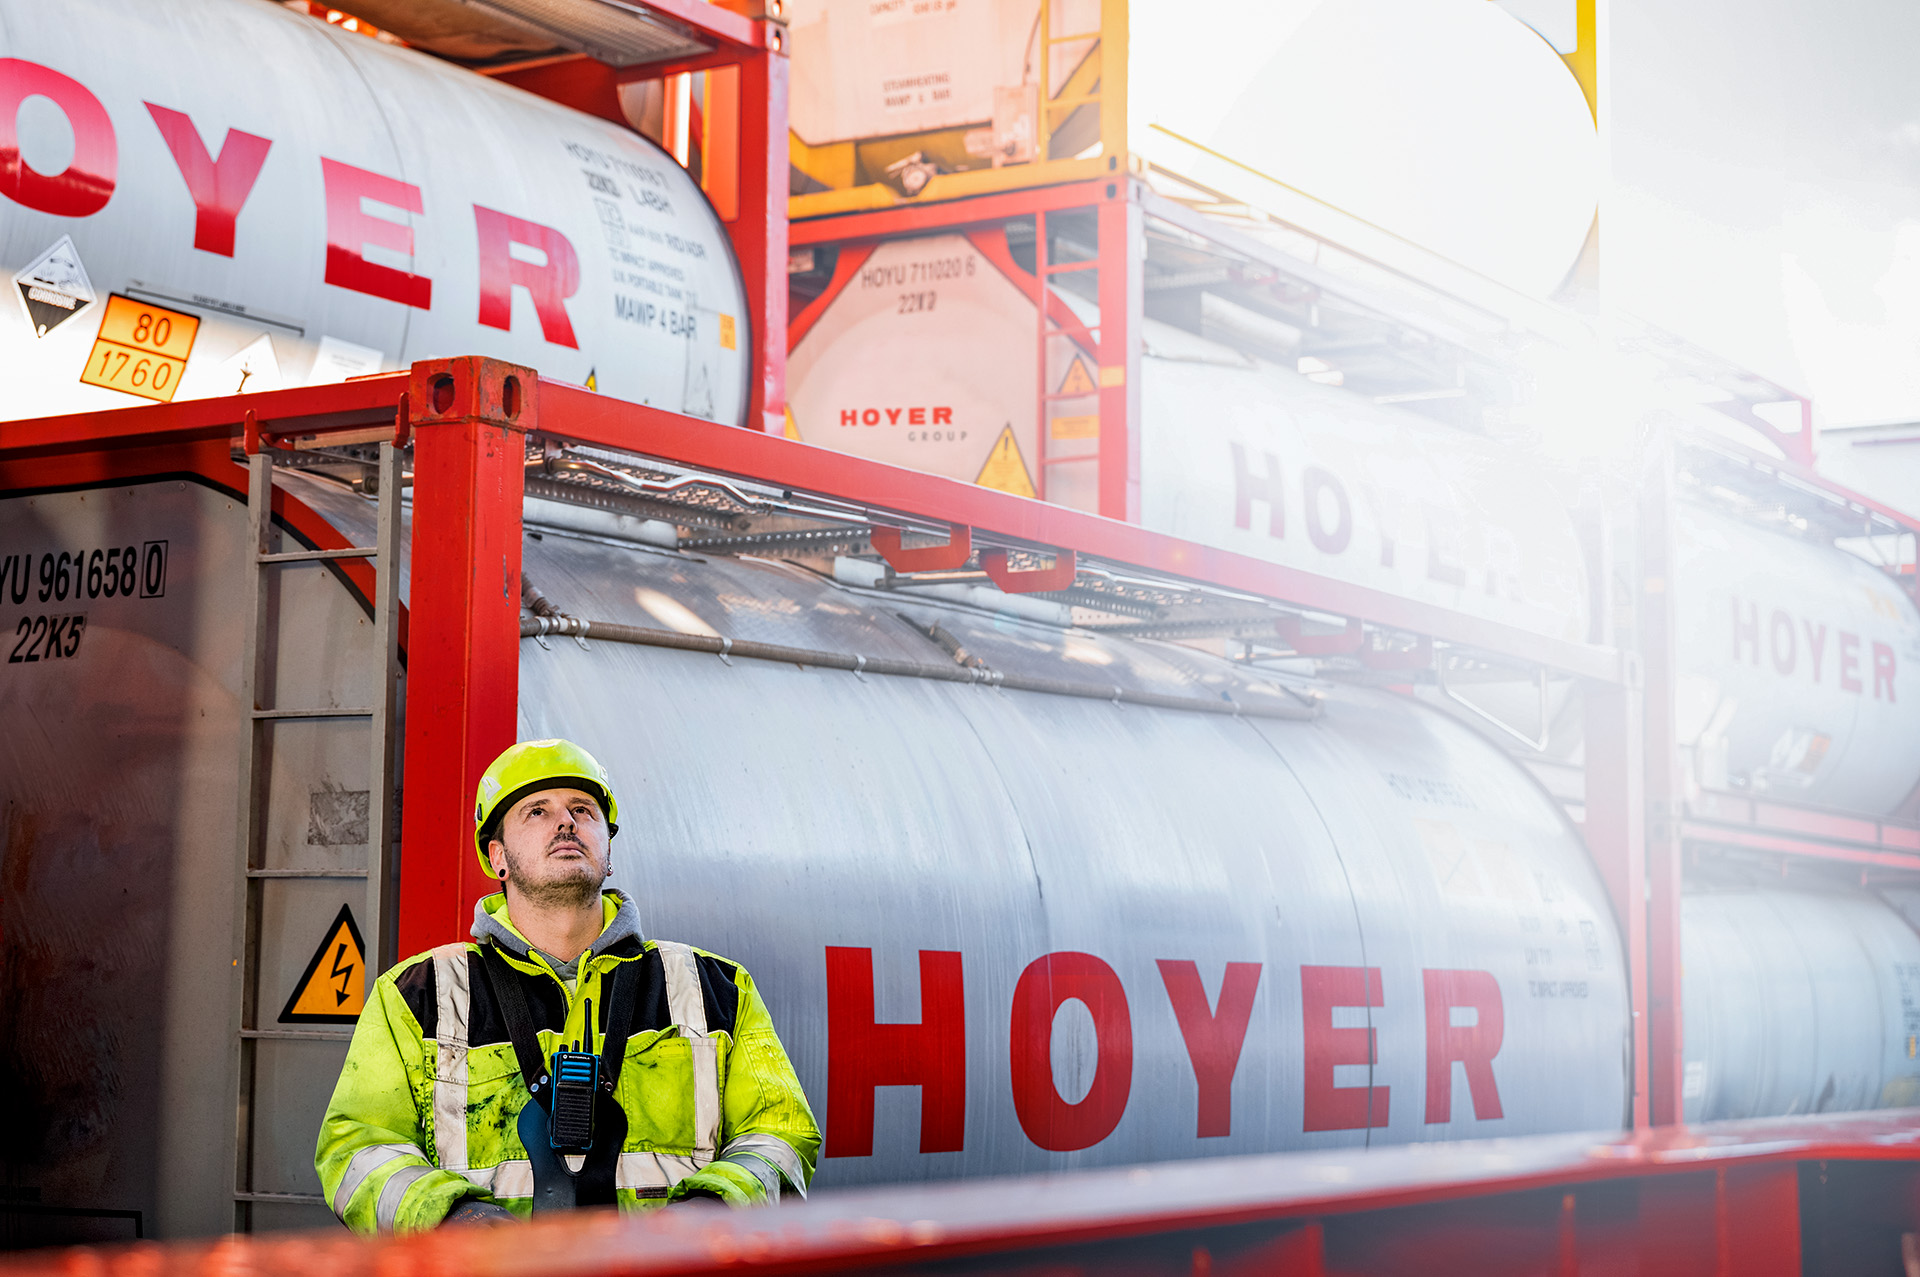 HOYER employee in front of HOYER tankcontainers, lifts tankcontainer with crane